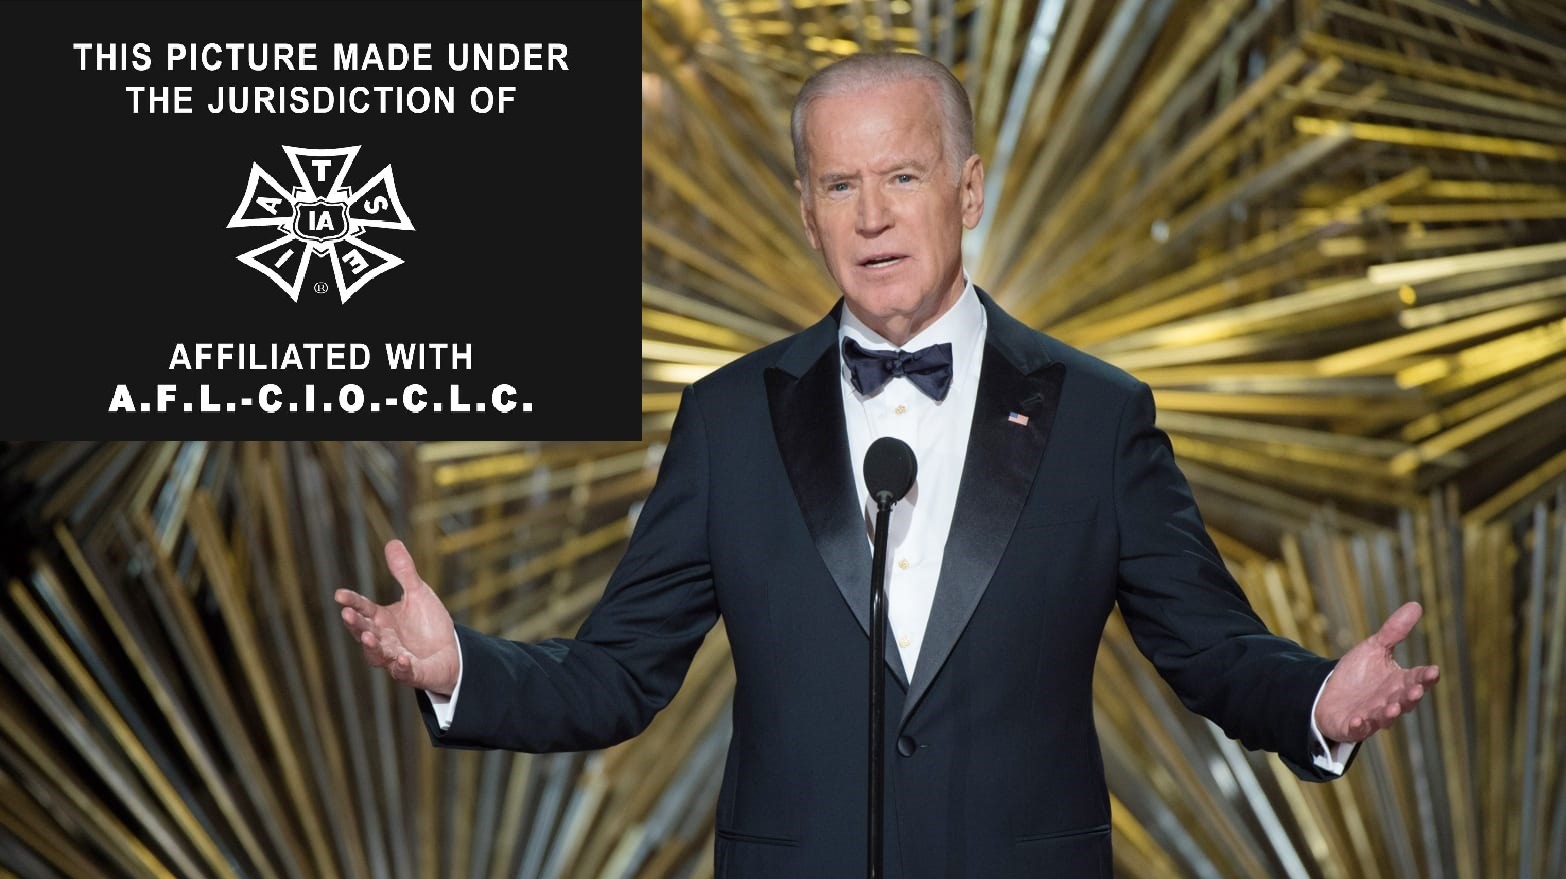 EXCLUSIVE: Hollywood Crew Members Reject Vaccine Mandates, Plan To Rebel Against Biden-Connected Union Leadership - National File